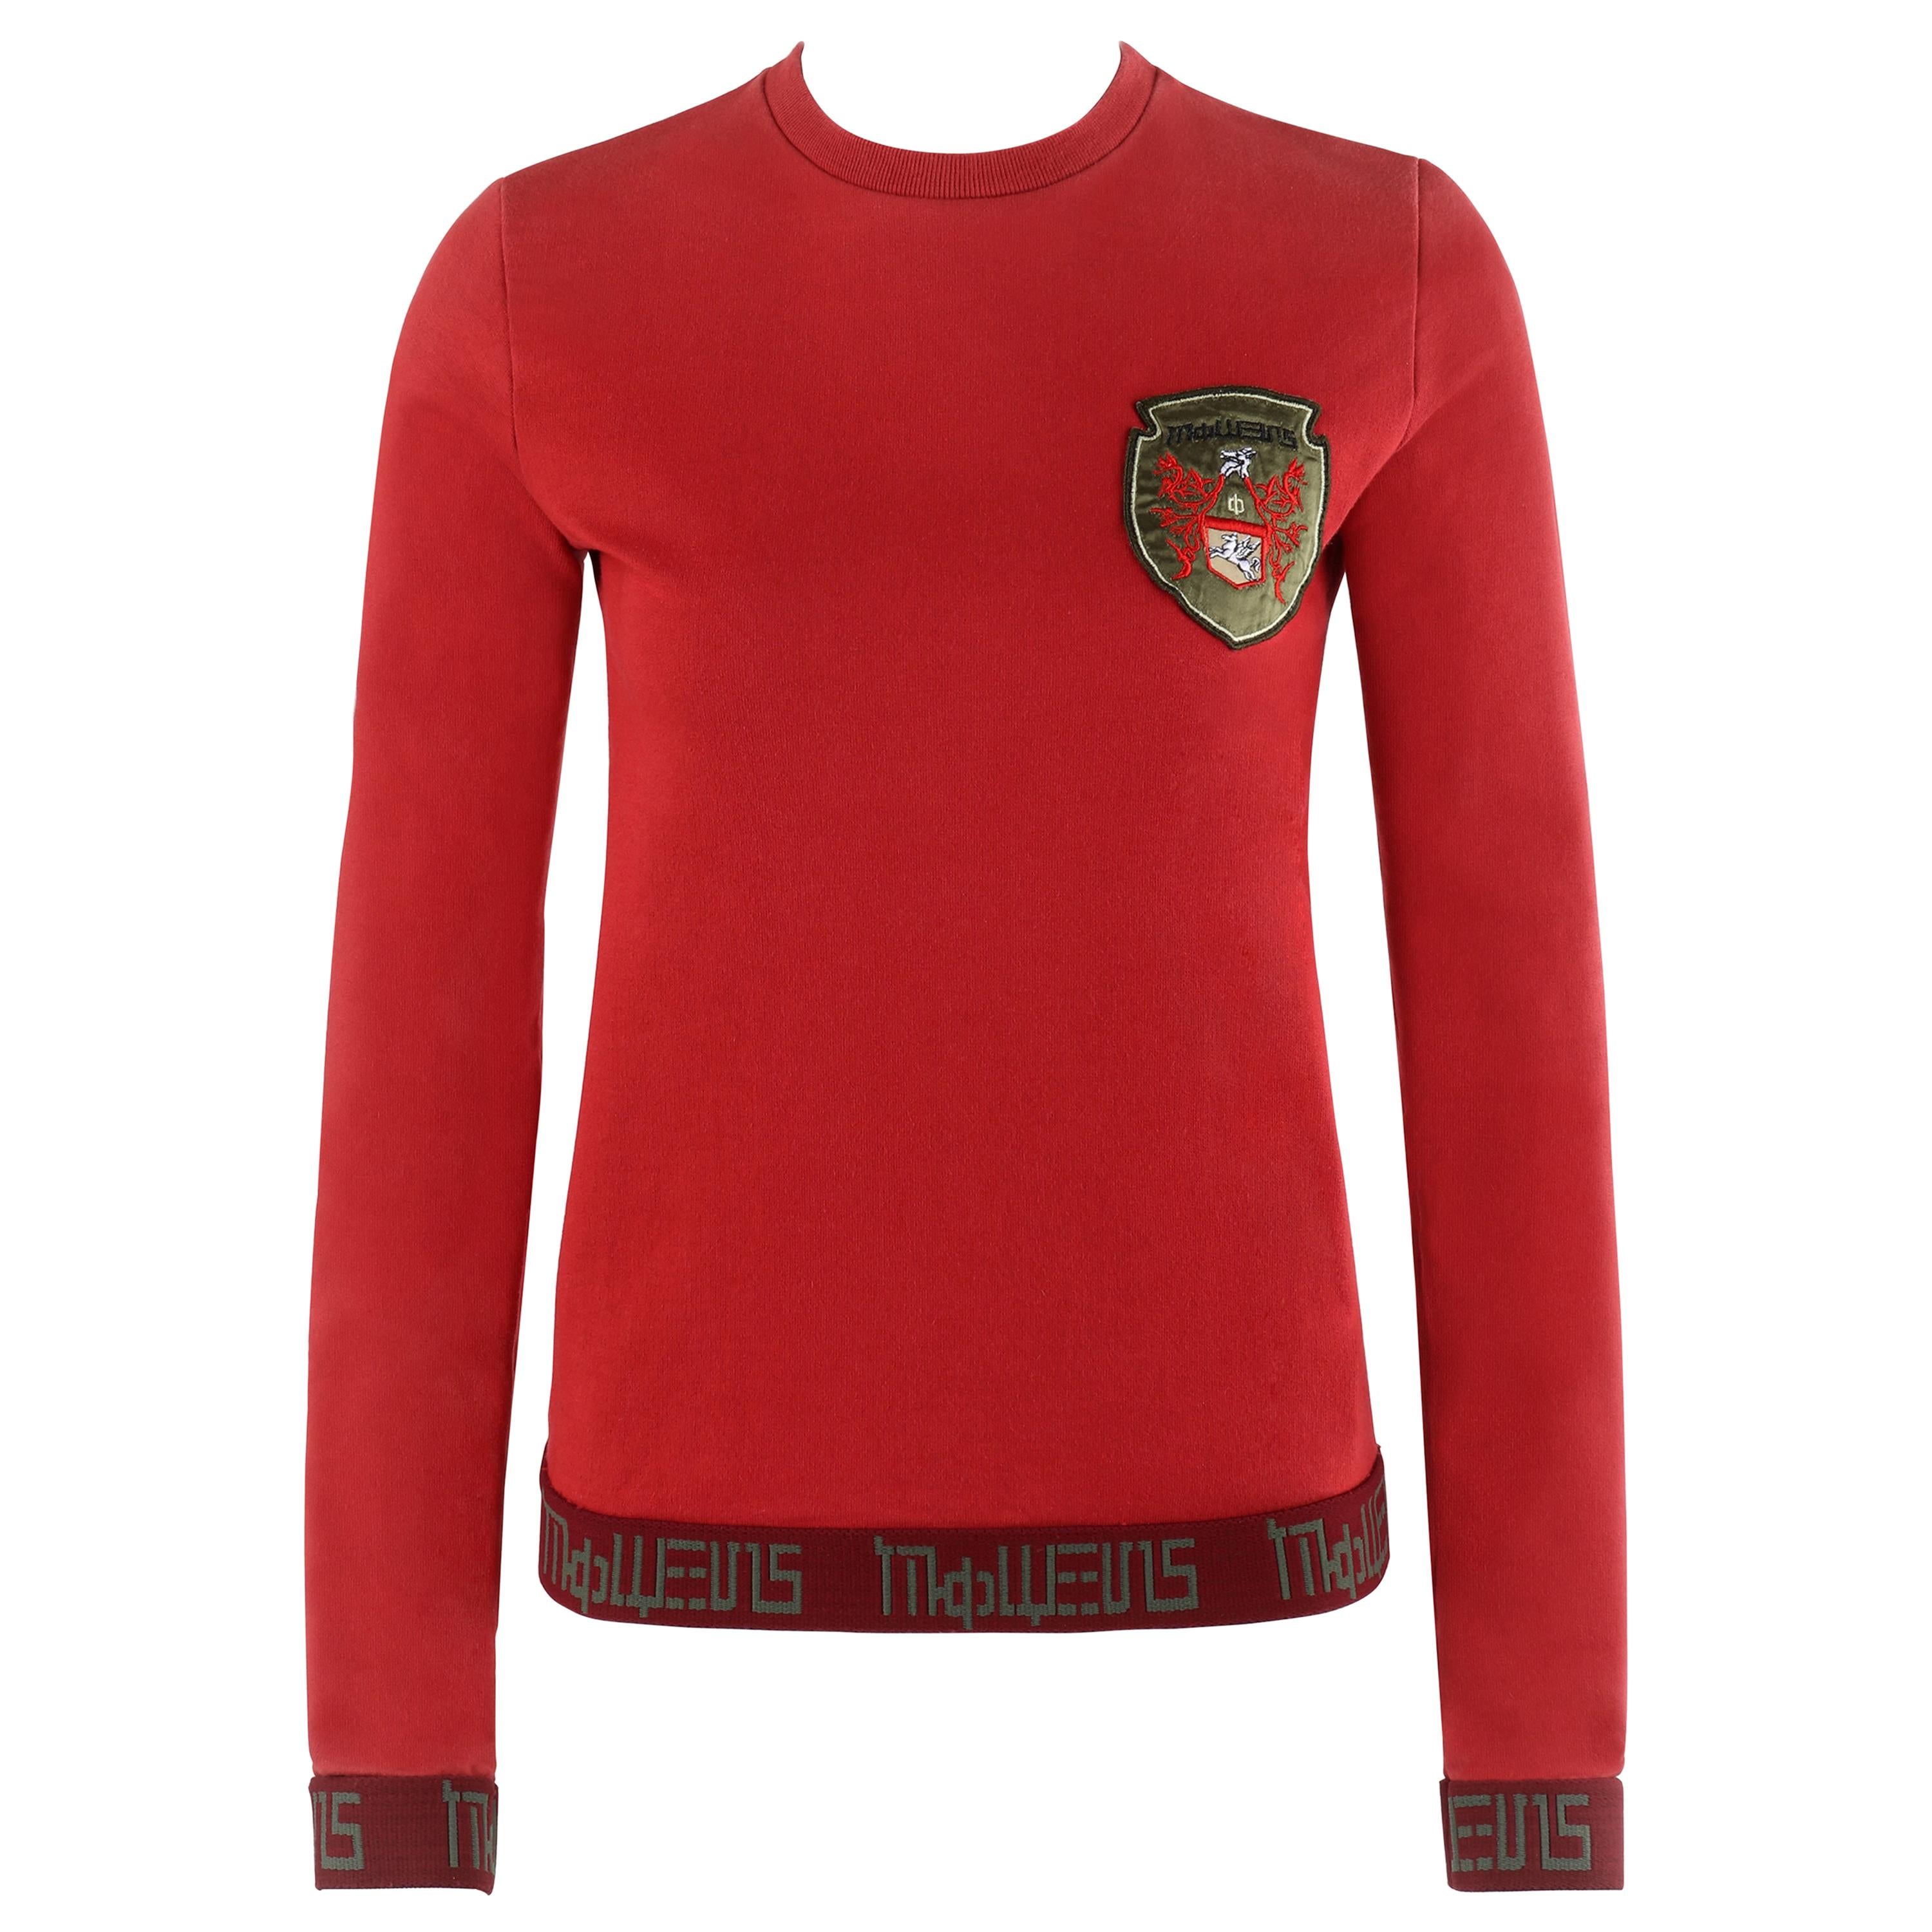 ALEXANDER McQUEEN S/S 2000 Red Cyrillic Pegasus Emblem LS Pullover Sweater Top For Sale